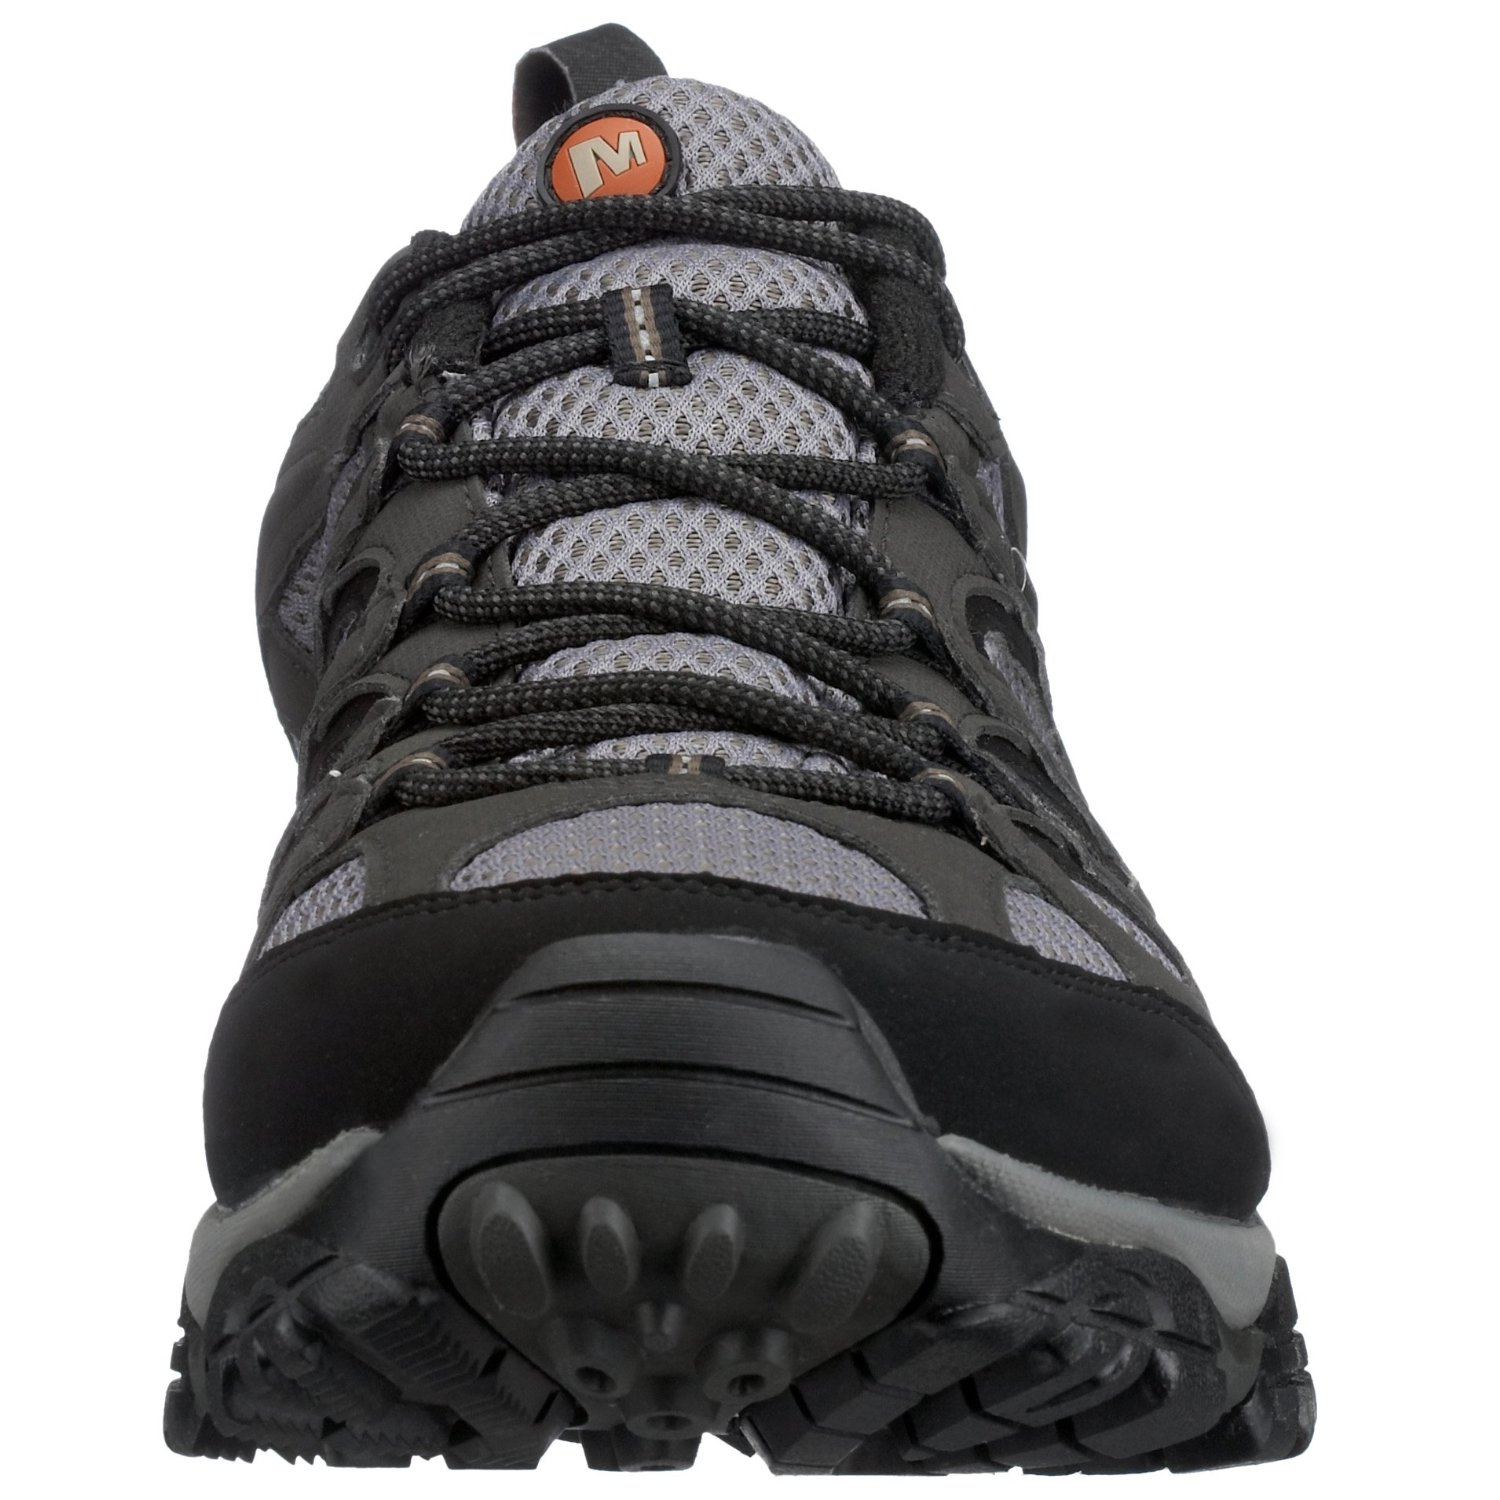 Hiking Shoes Here: Merrell Men's Moab GORE-TEX® XCR® Lace-Up,Beluga,13 W US